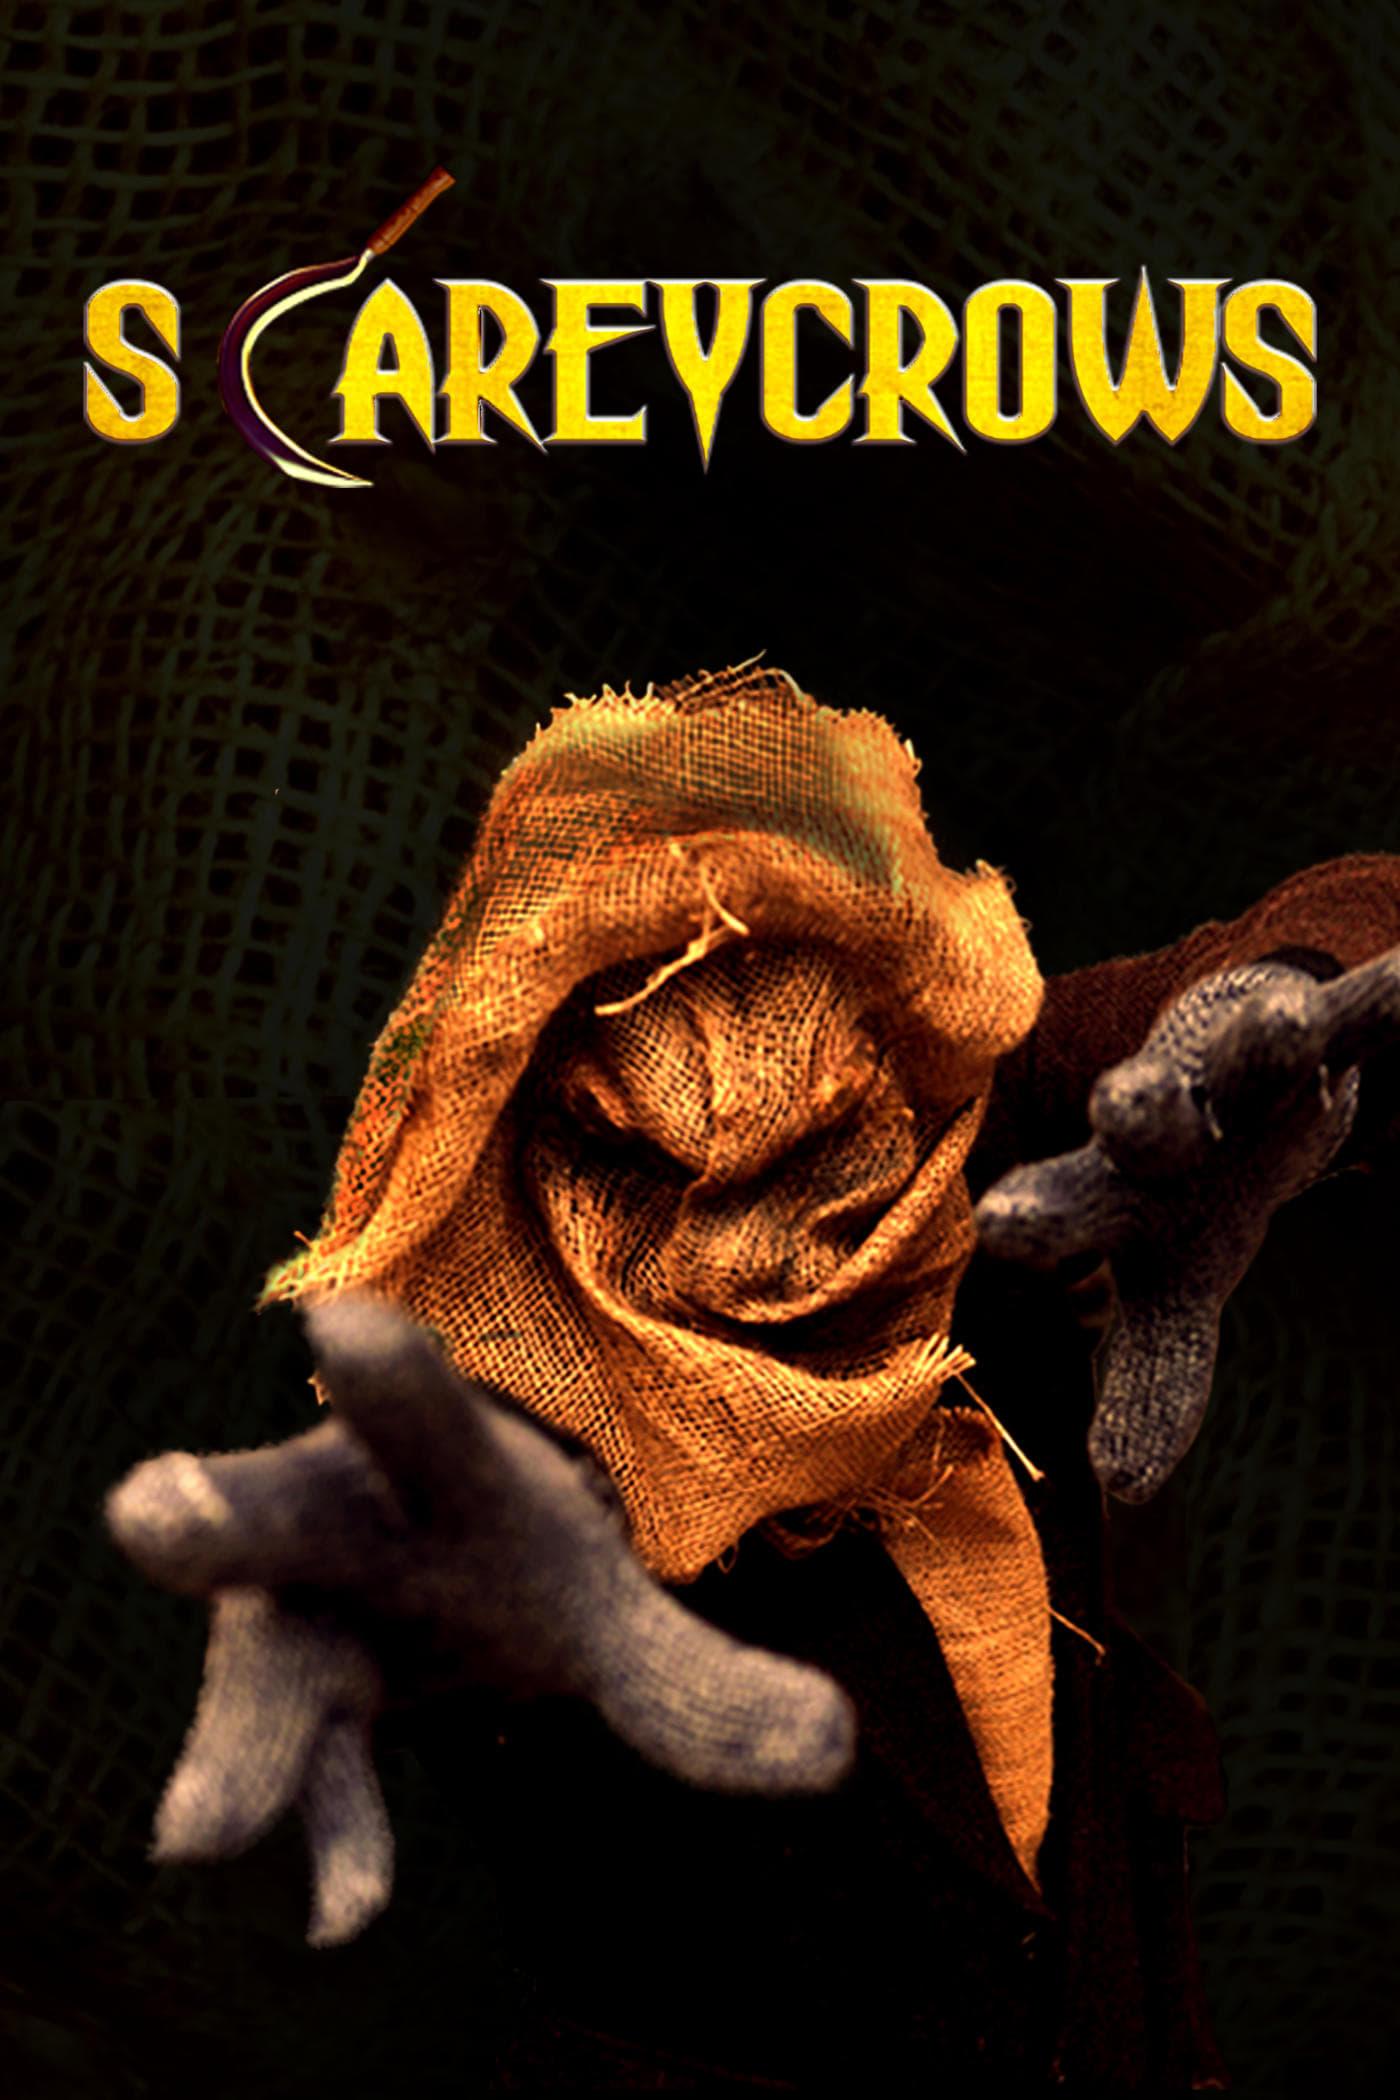 Scareycrows poster